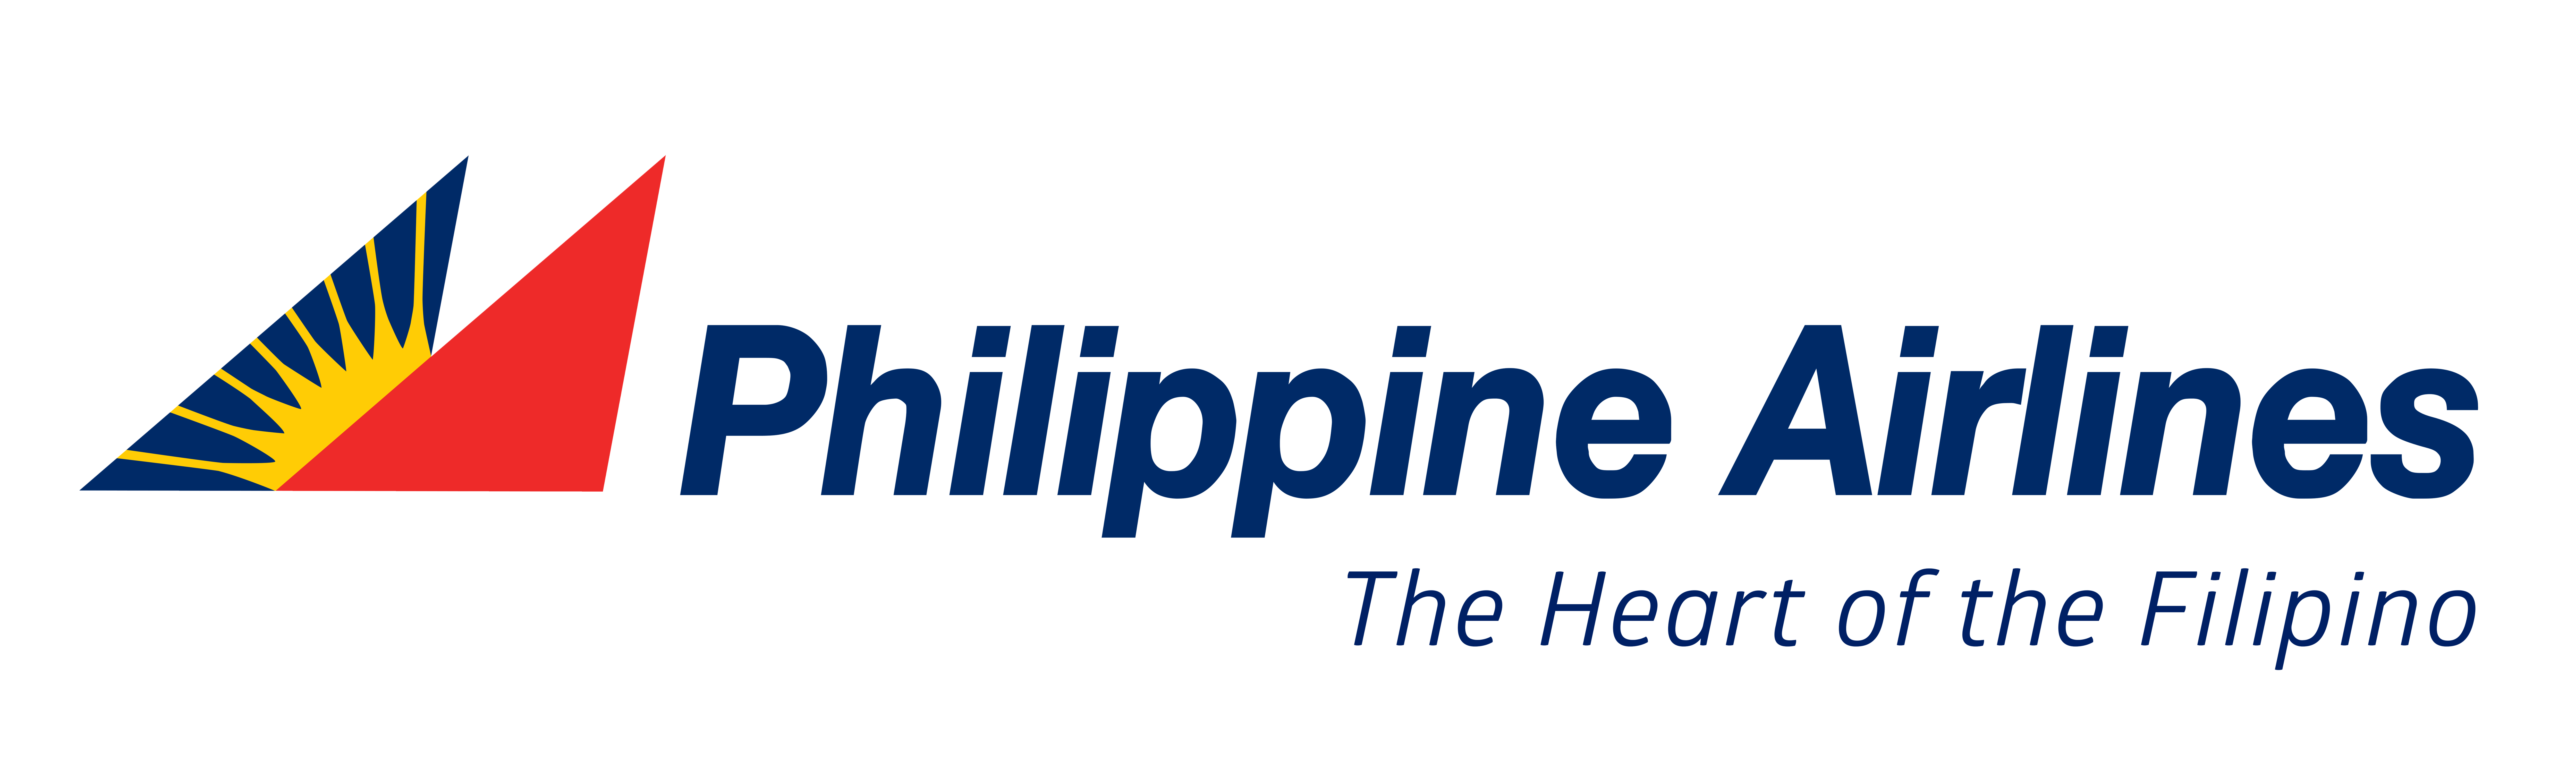 Gold Airline Logo - Philippine airline logo png 5 » PNG Image